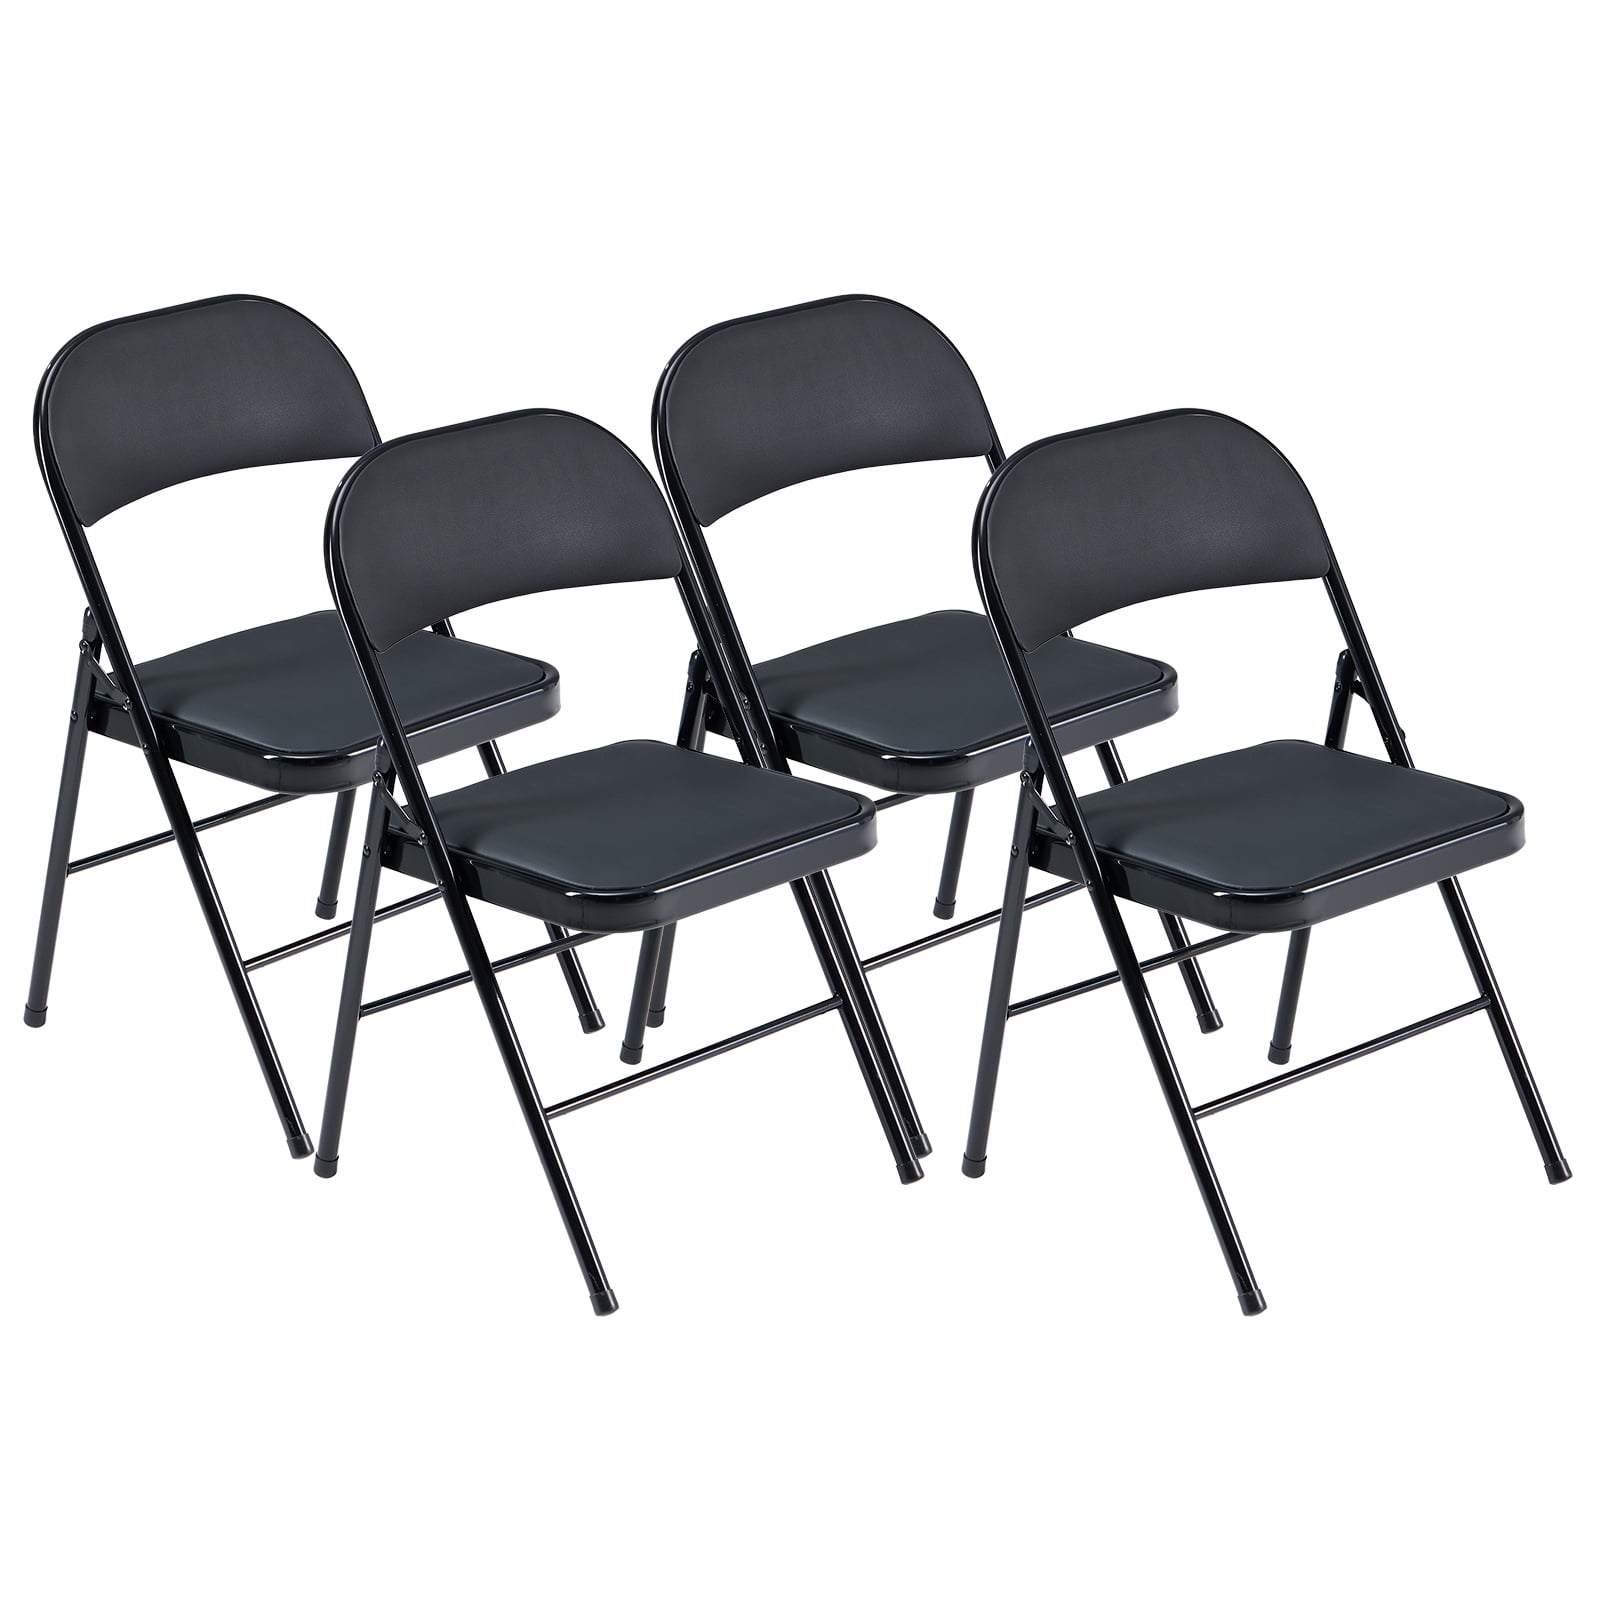 UBesGoo 4 Pack Folding Chairs Cushioned Padded Seat Wedding Chairs with Metal Frame Home Office Party Use, Black